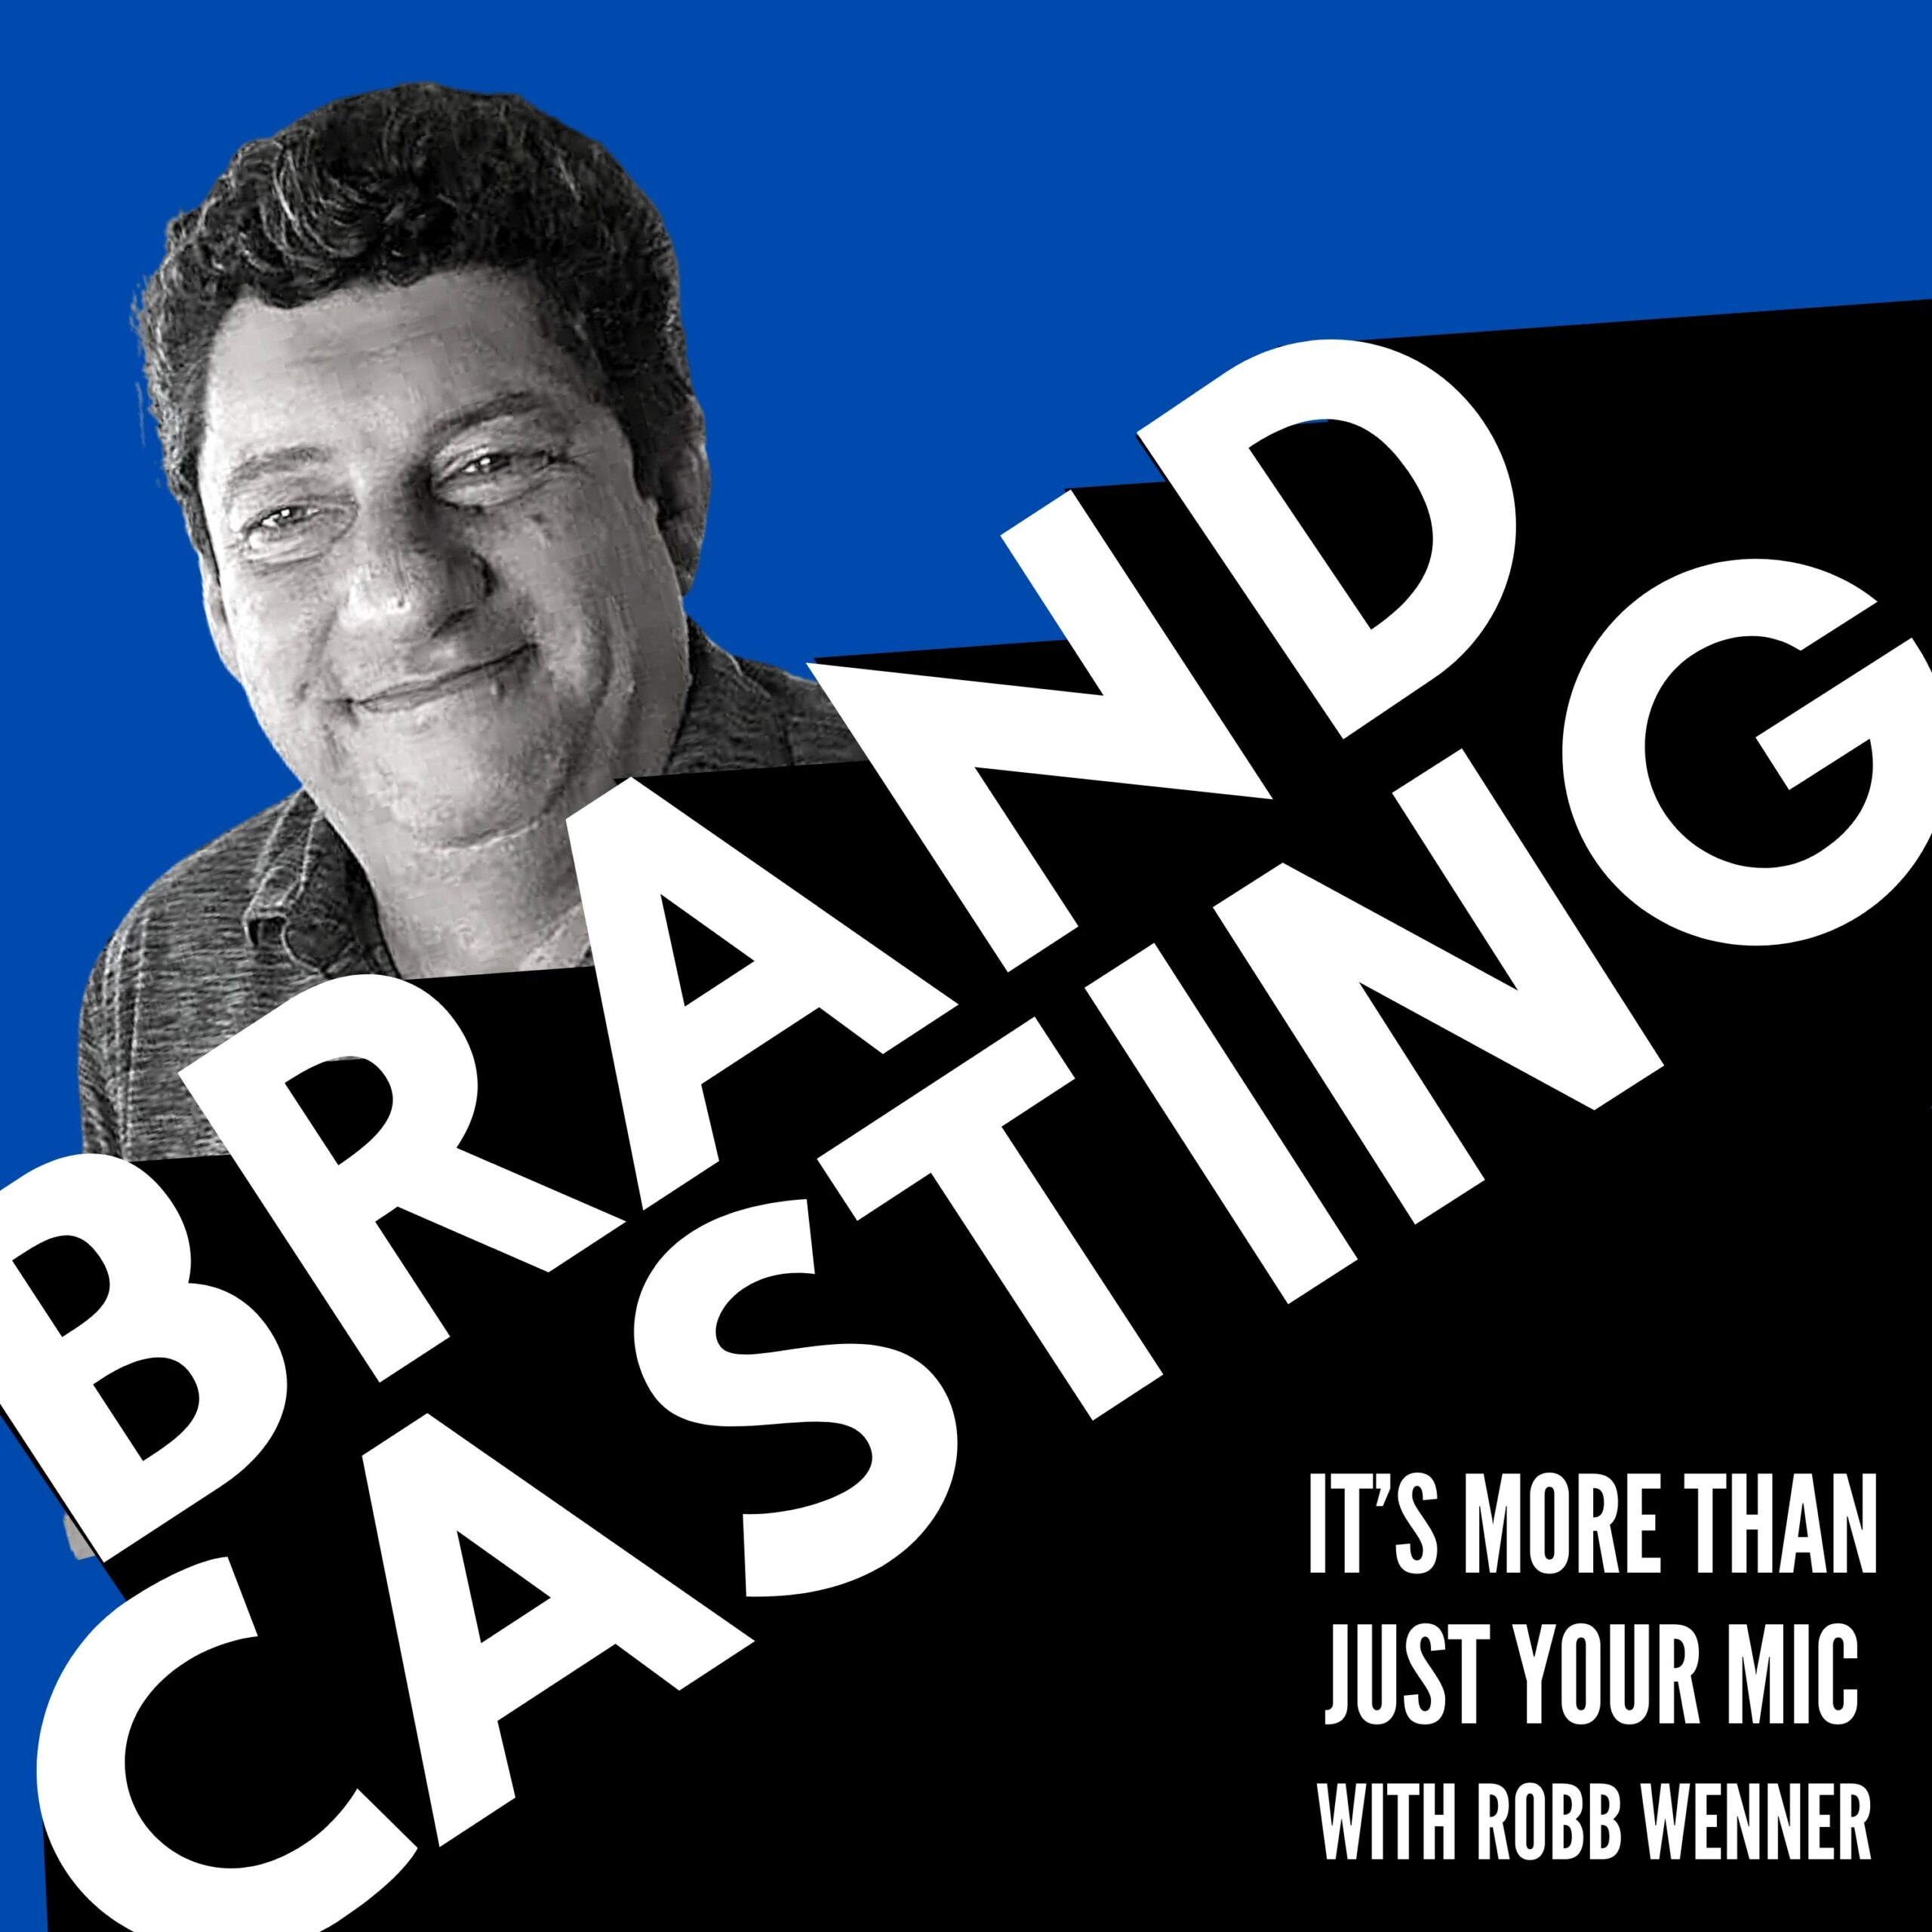 Brandcasting – It’s More Than Just Your Mic with Robb Wenner